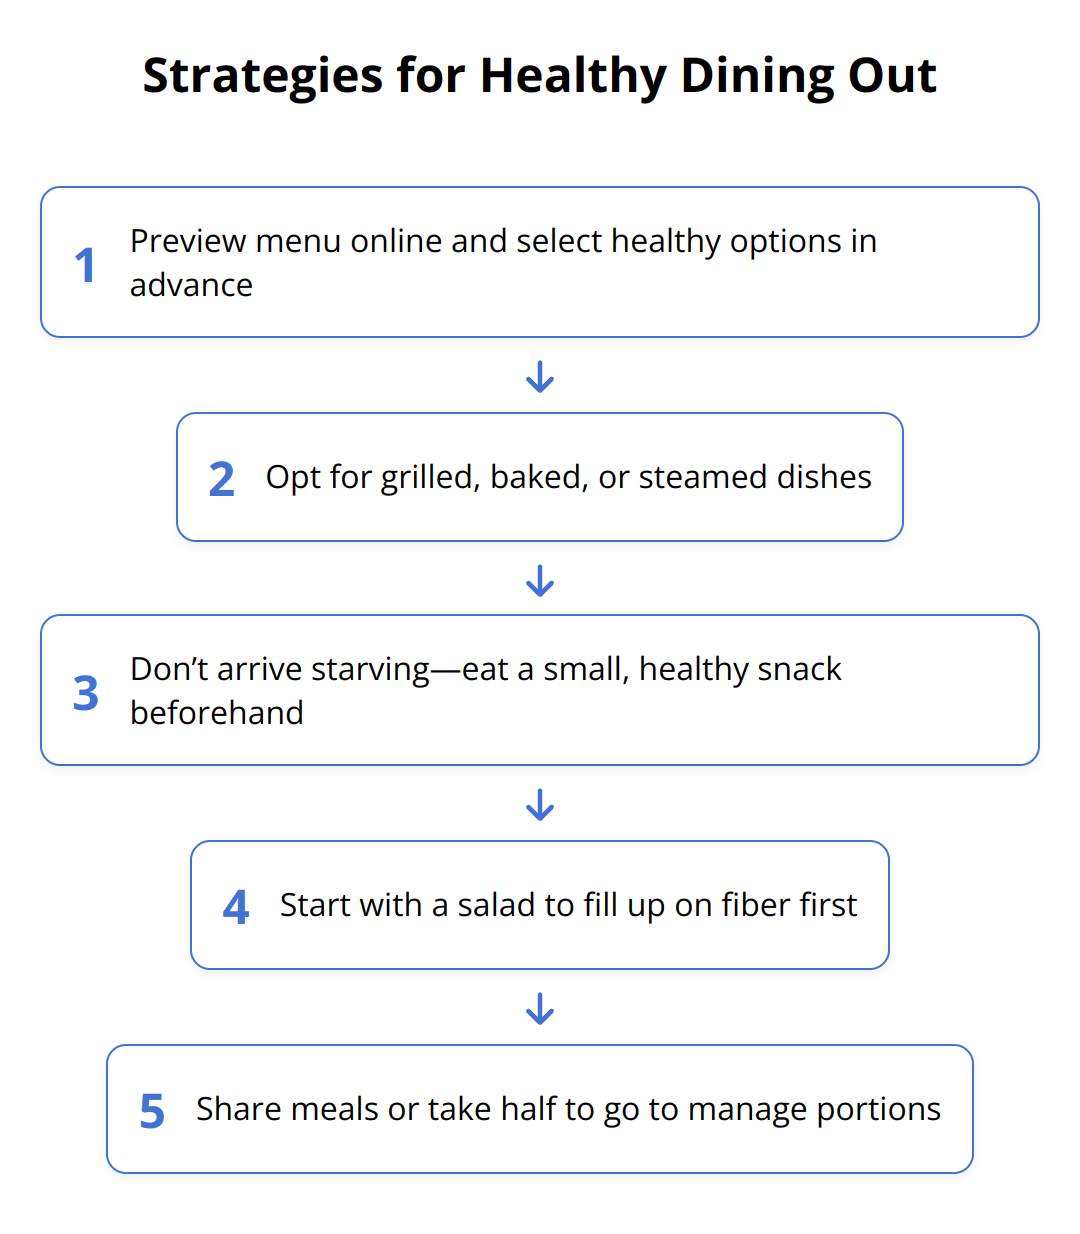 Flow Chart - Strategies for Healthy Dining Out